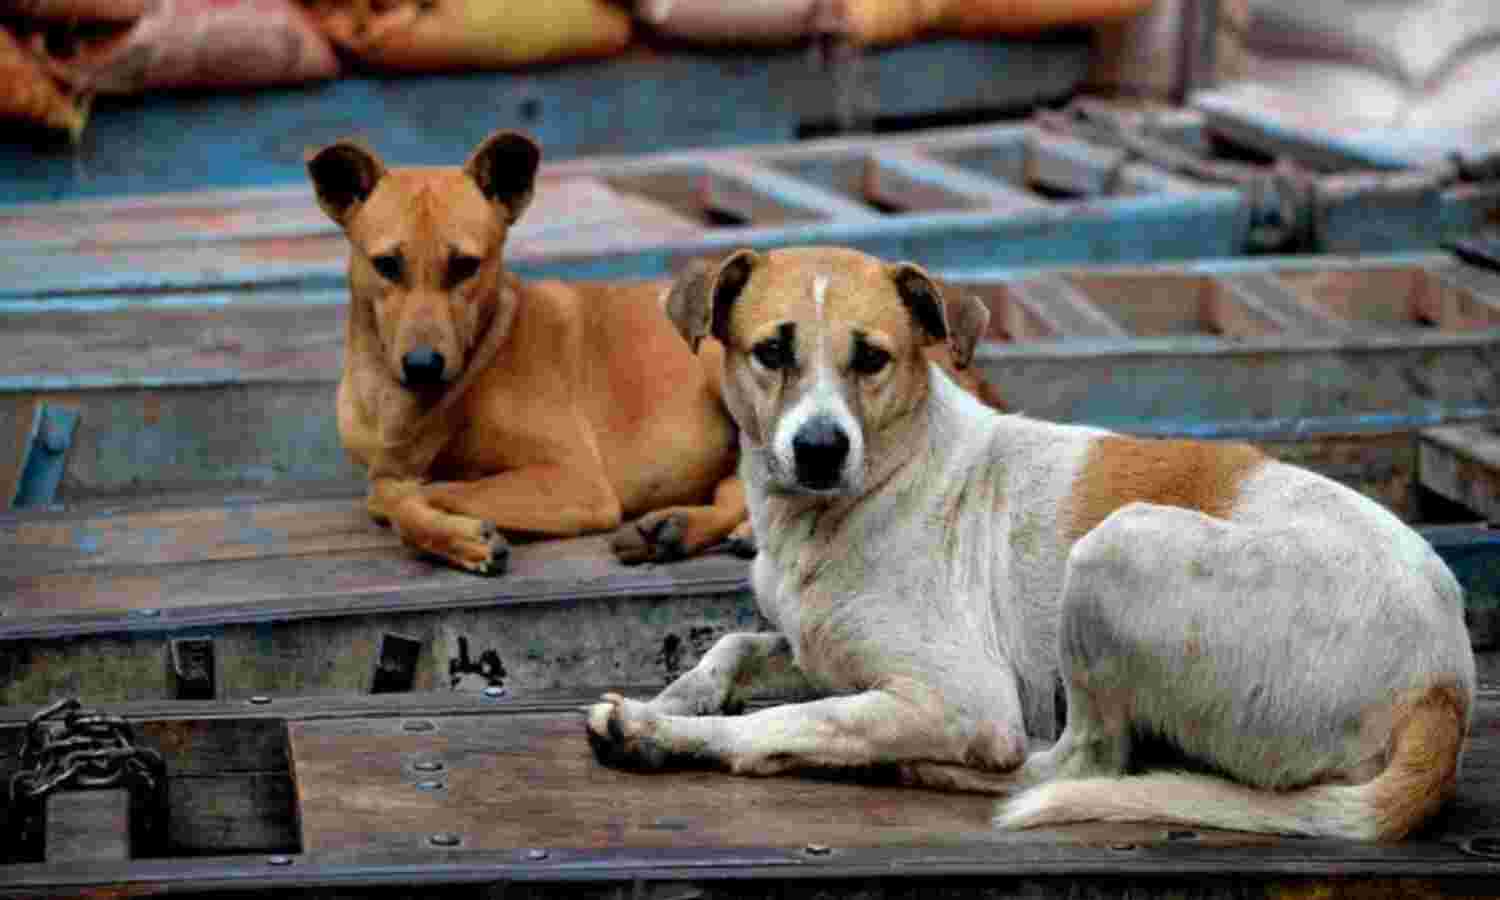 Chennai to get 11 new vehicles to catch stray dogs, cattle